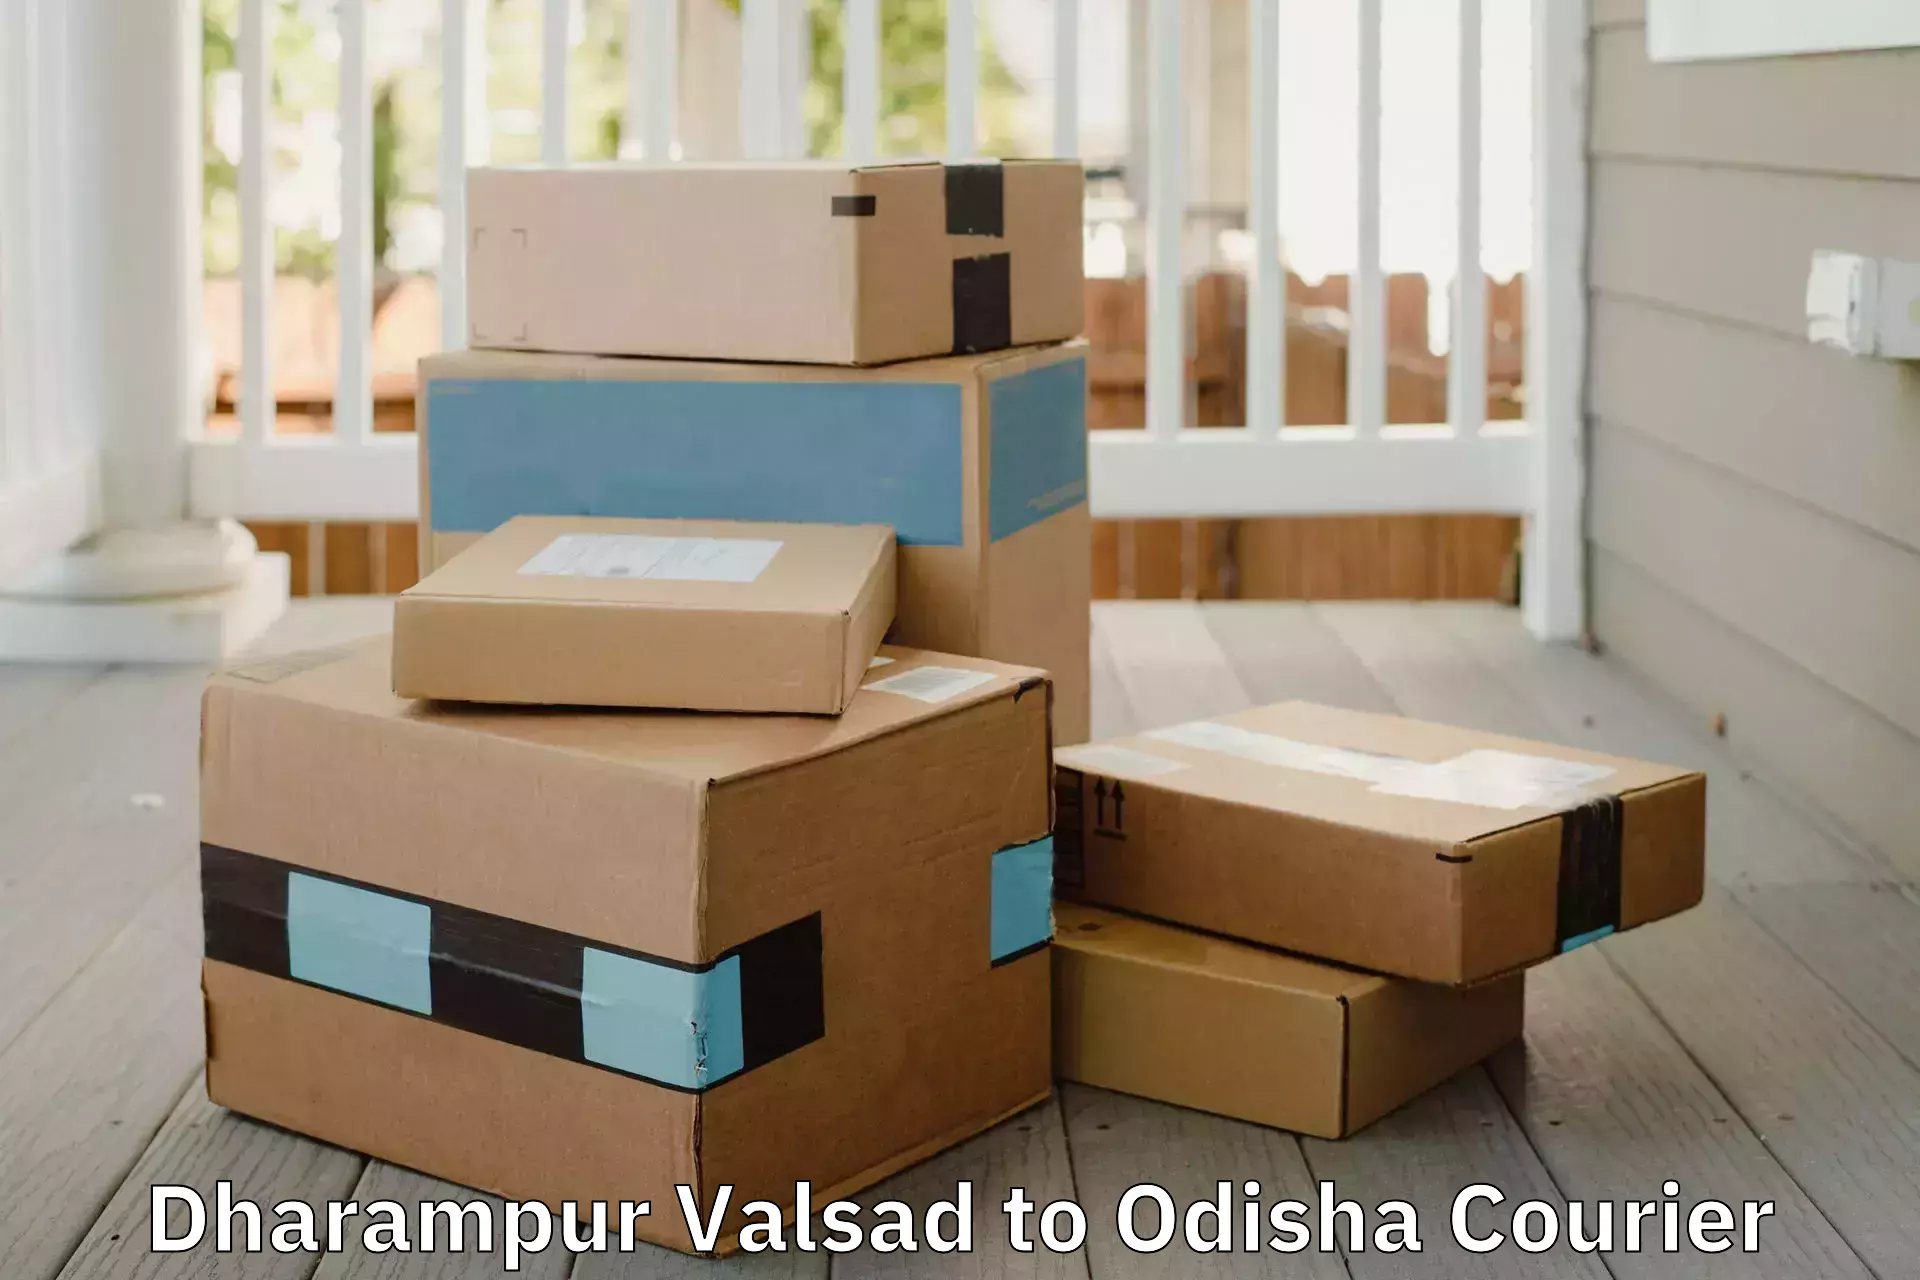 Nationwide furniture movers Dharampur Valsad to Dhamara